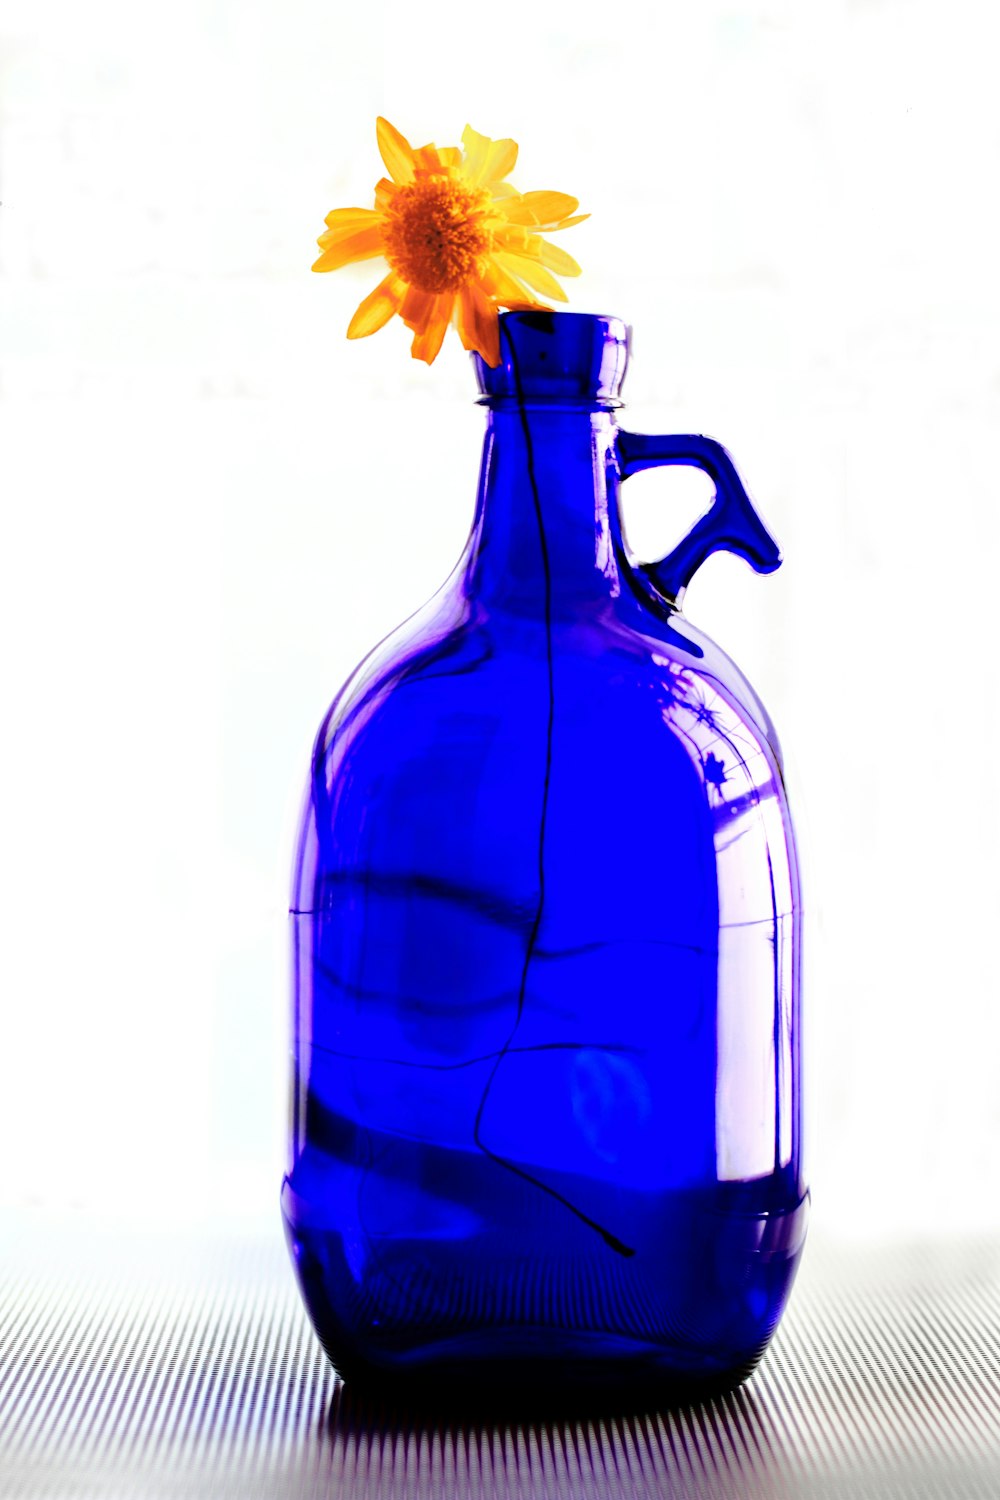 blue glass bottle with yellow flower